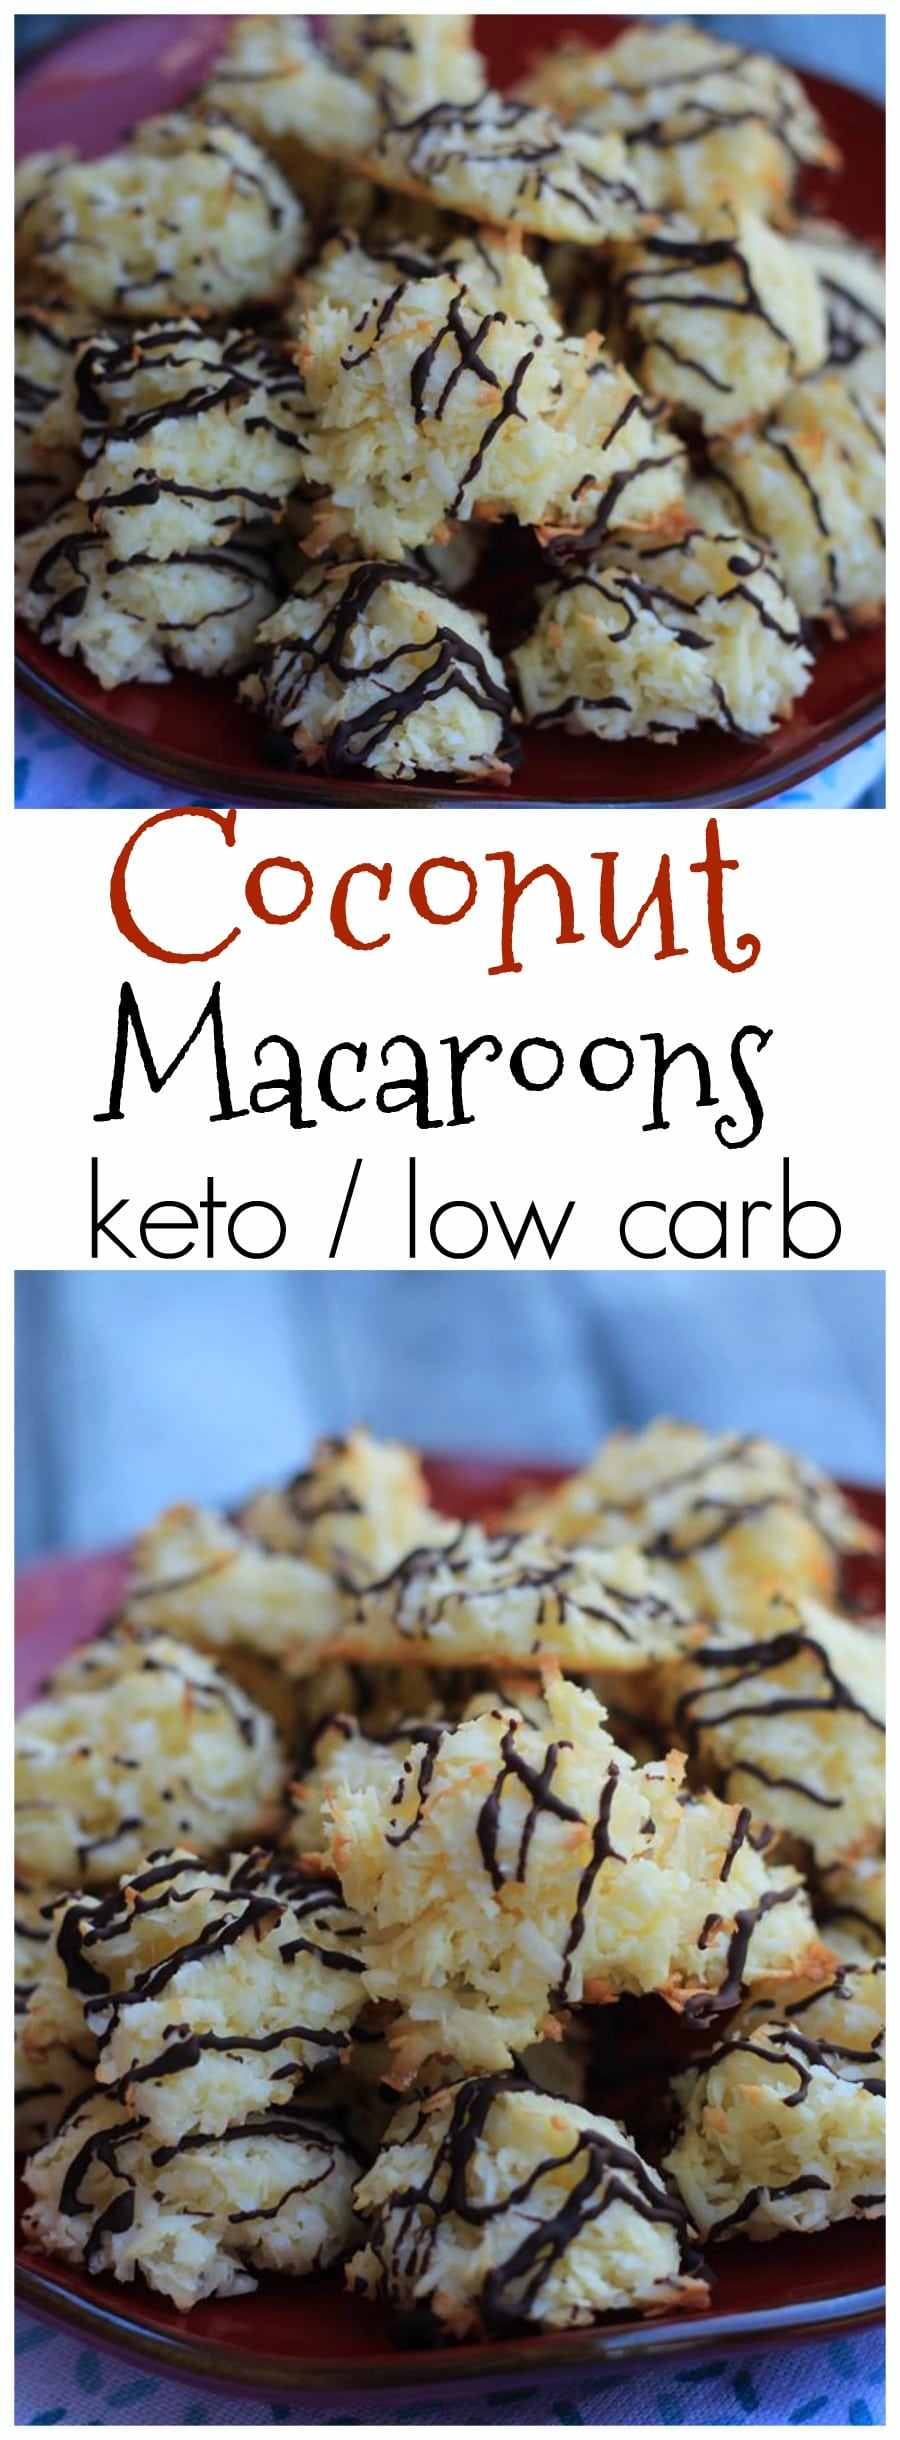 Chocolate Coconut Macaroons are an ideal Keto friendly cookie idea for your sweet treat cravings! Ideal for cookie exchanges and dessert any day!